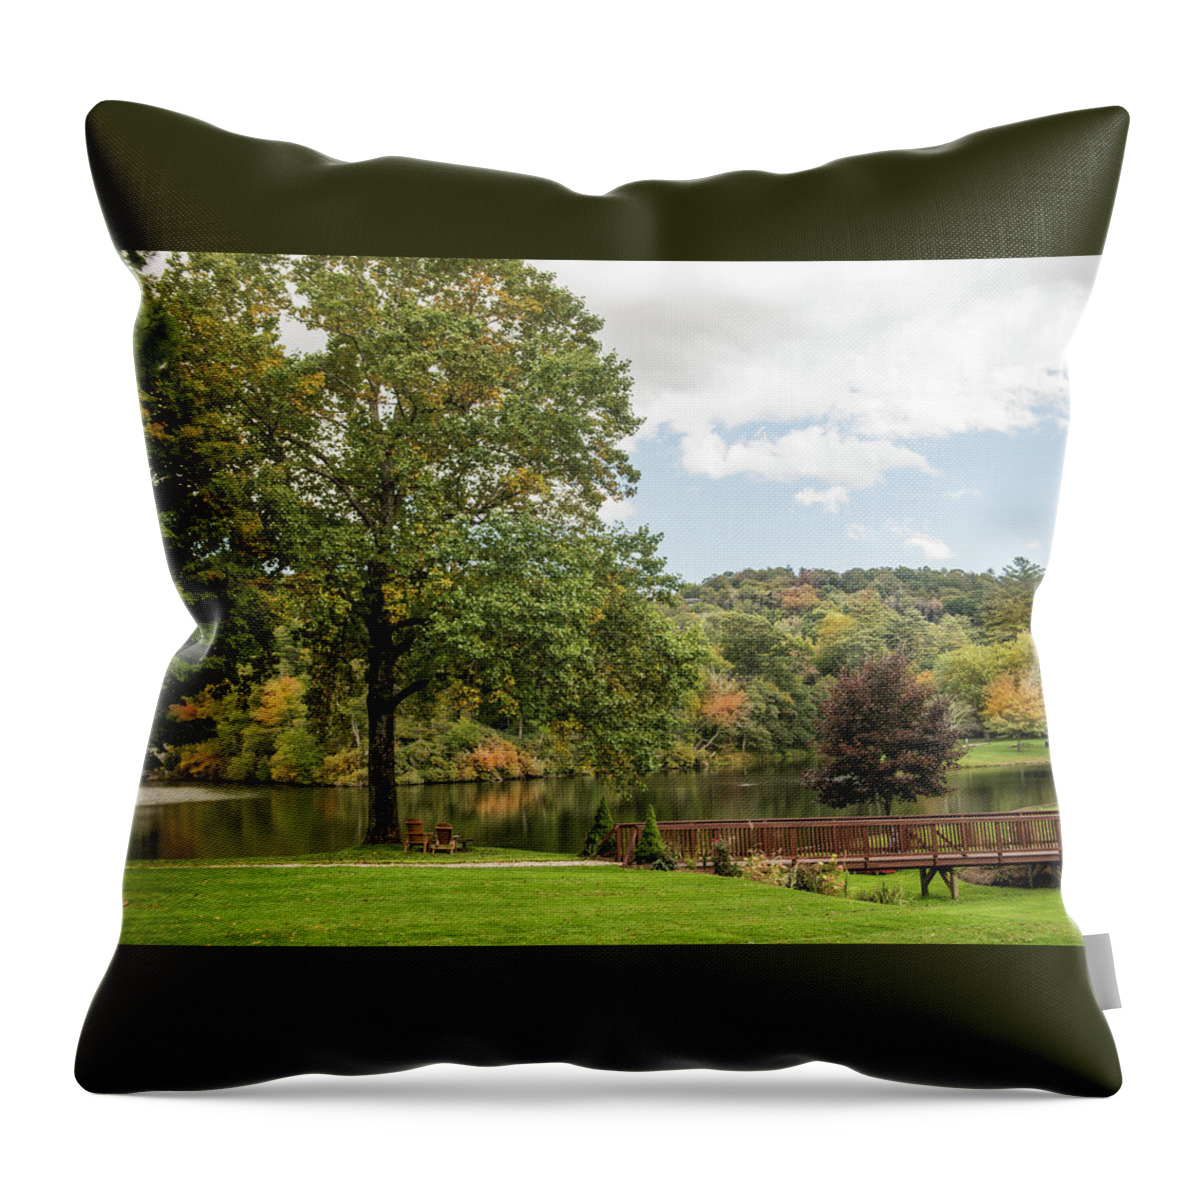 Chetola Lodge Throw Pillow featuring the photograph Chetola Lodge In The Fall by Cynthia Wolfe